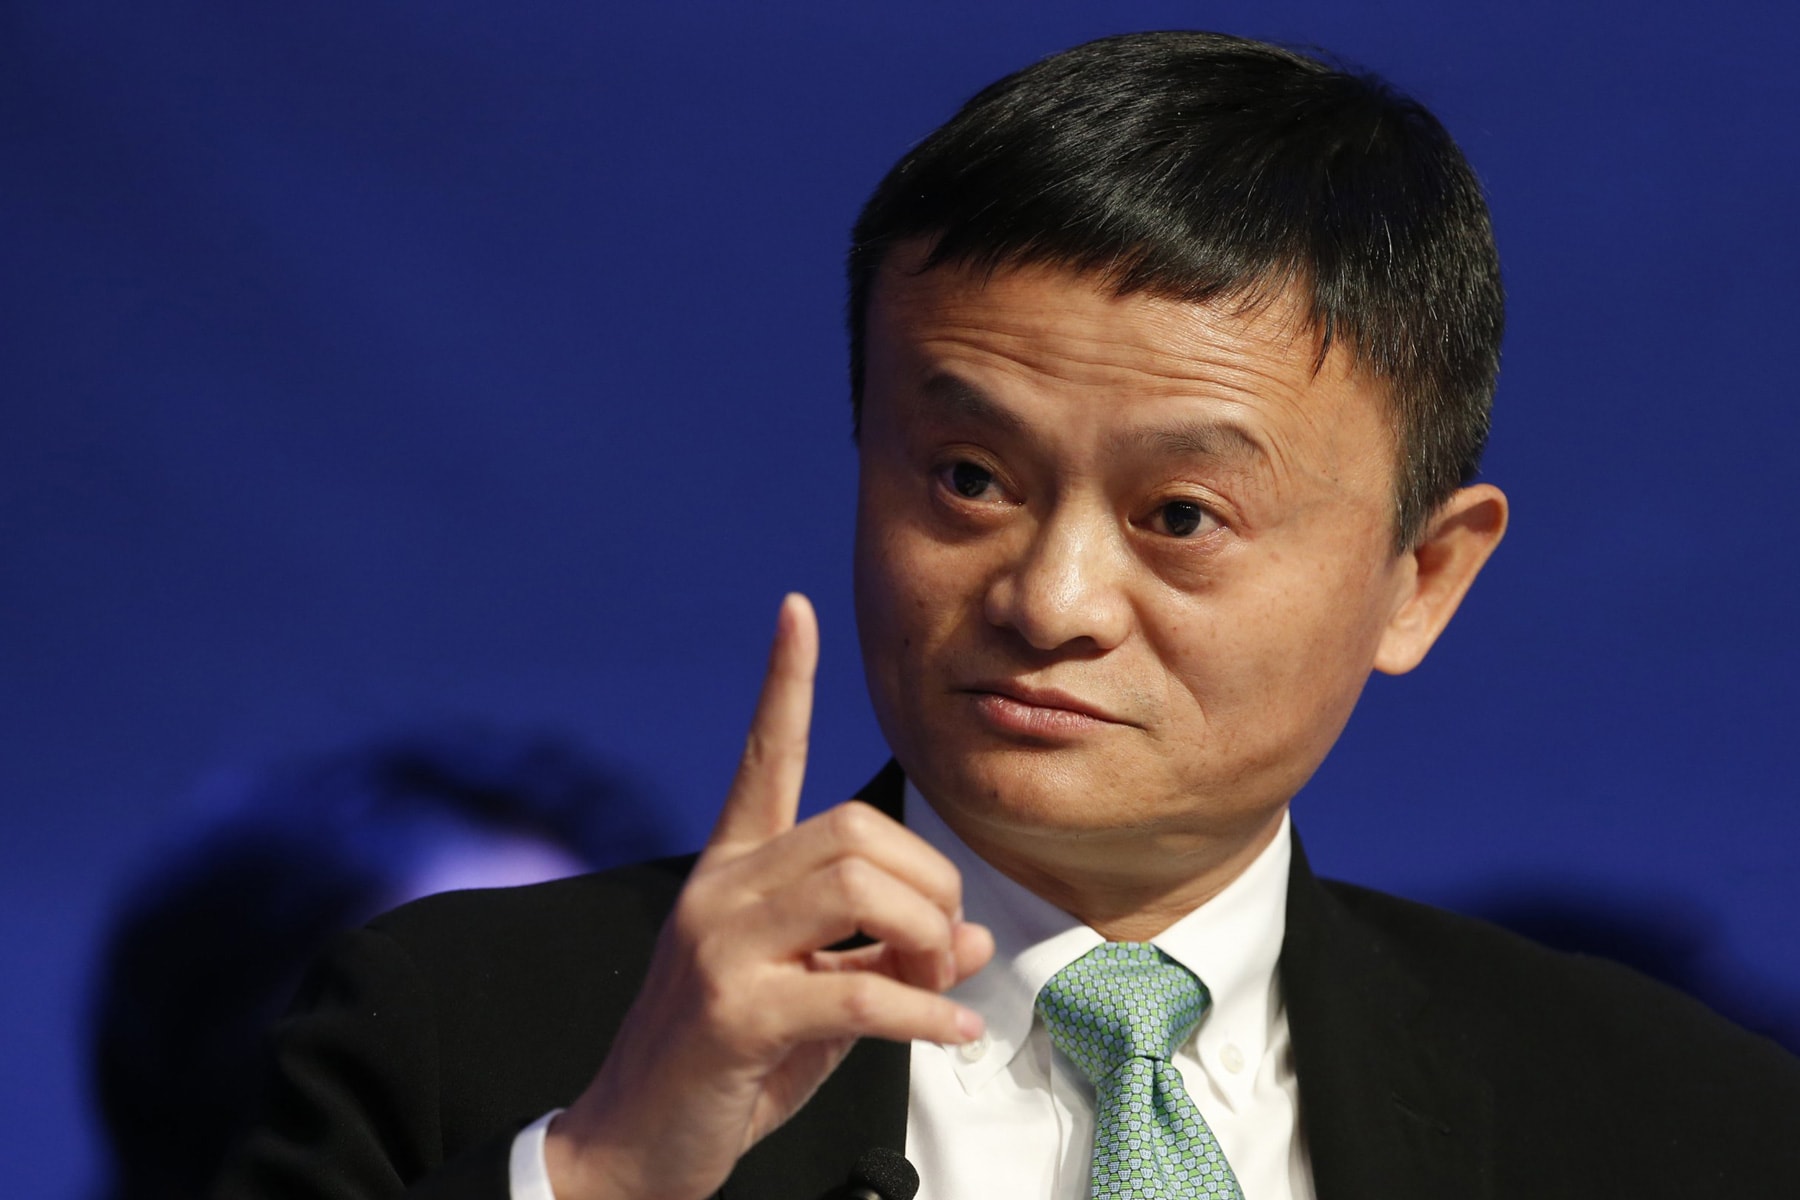 jack ma alibaba ceo retirement replacement daniel zhang 54 years old bill gates plan philanthropy announcement open letter china